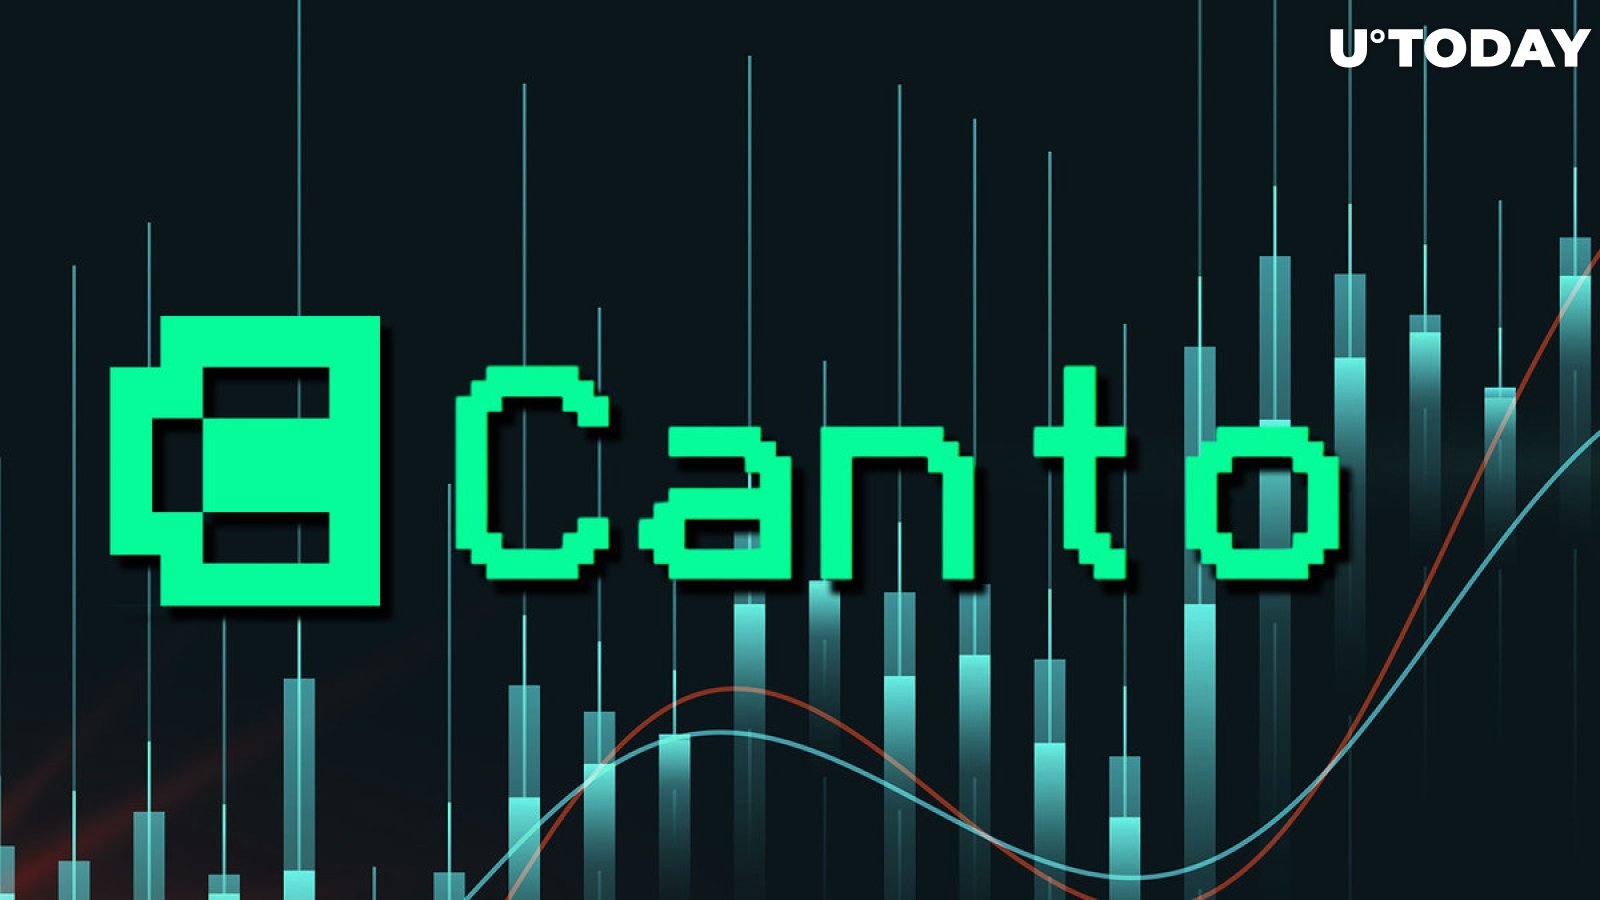 Canto (CANTO) Crypto Token Rallied by 720% in January: Possible Reasons